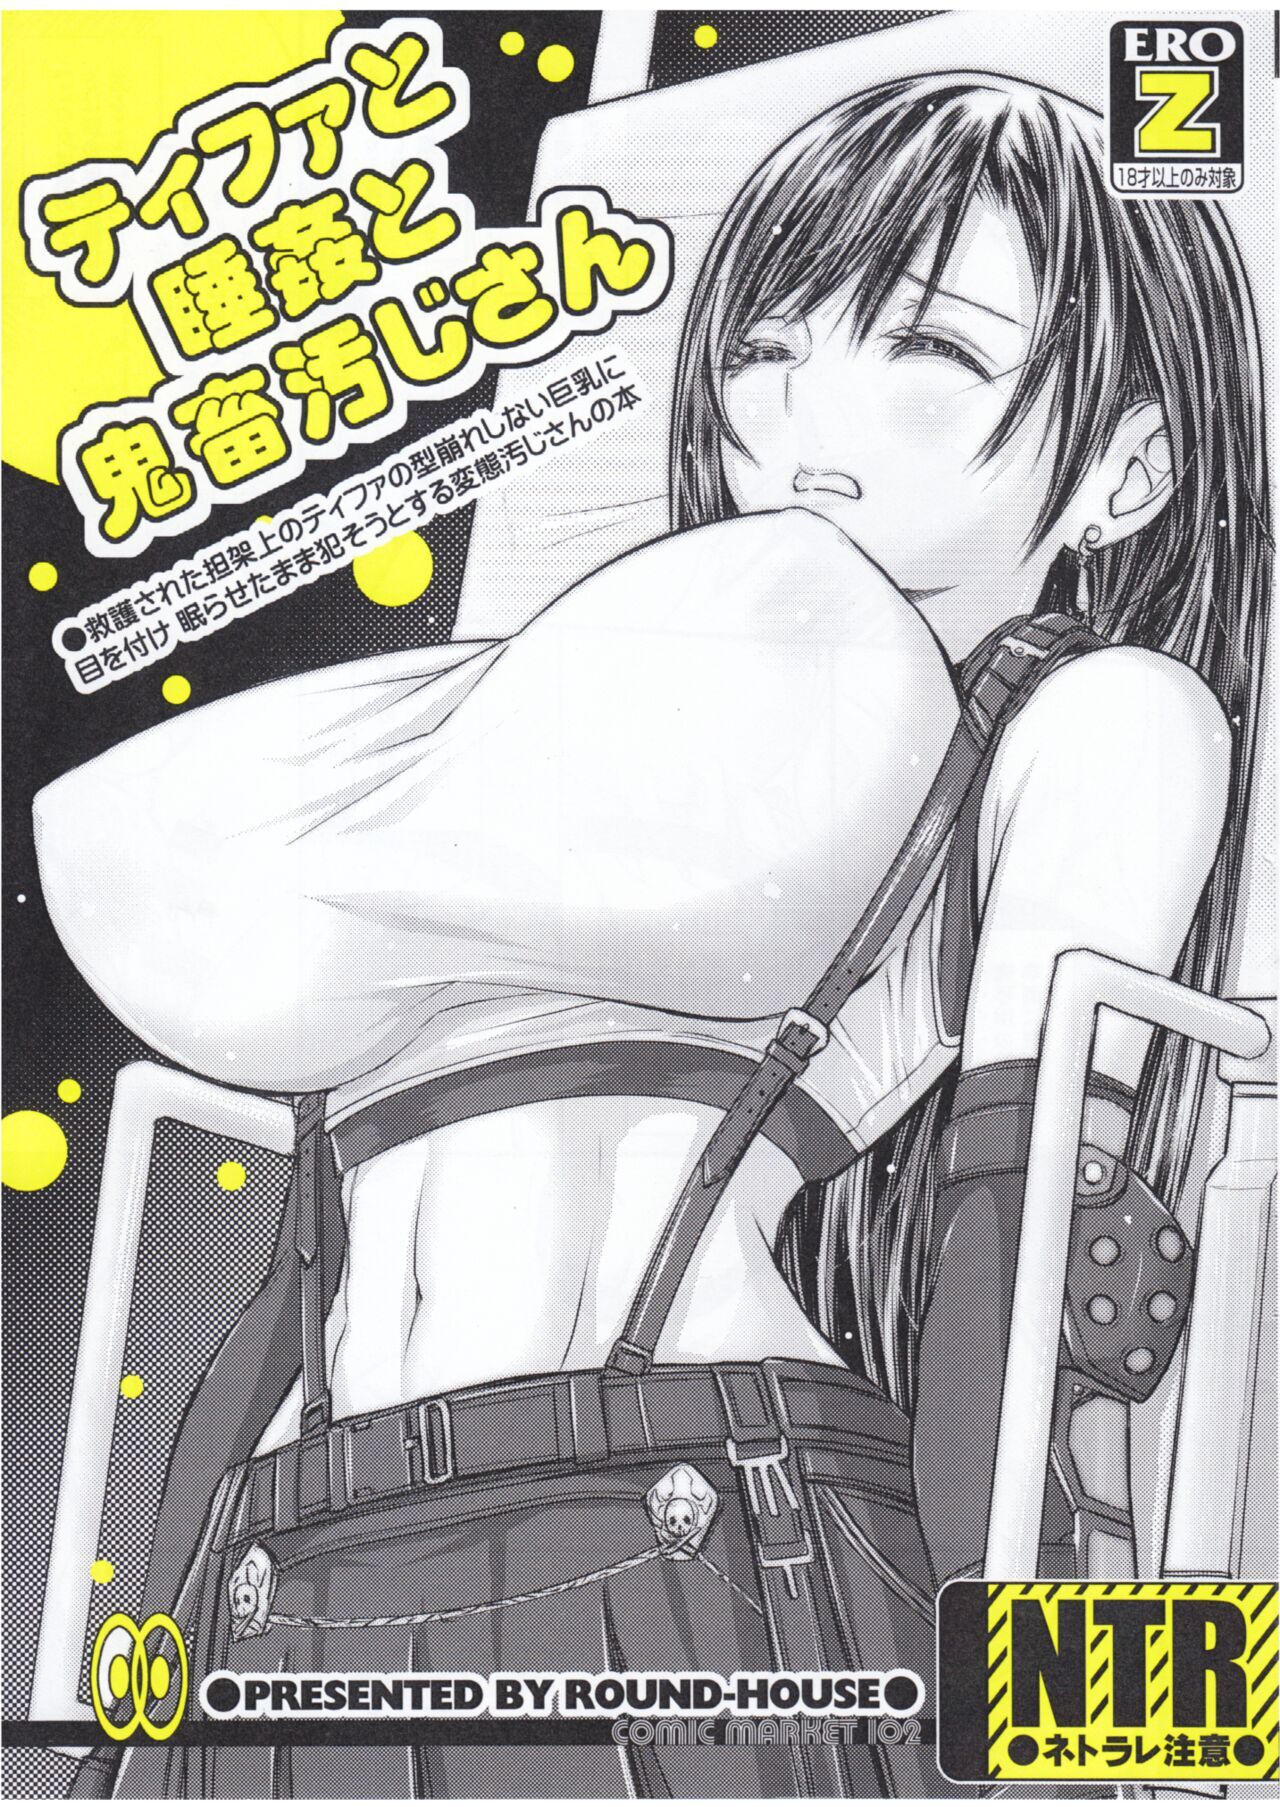 Tifa Hentai English - Tifa Lockhart - sorted by number of objects - Free Hentai